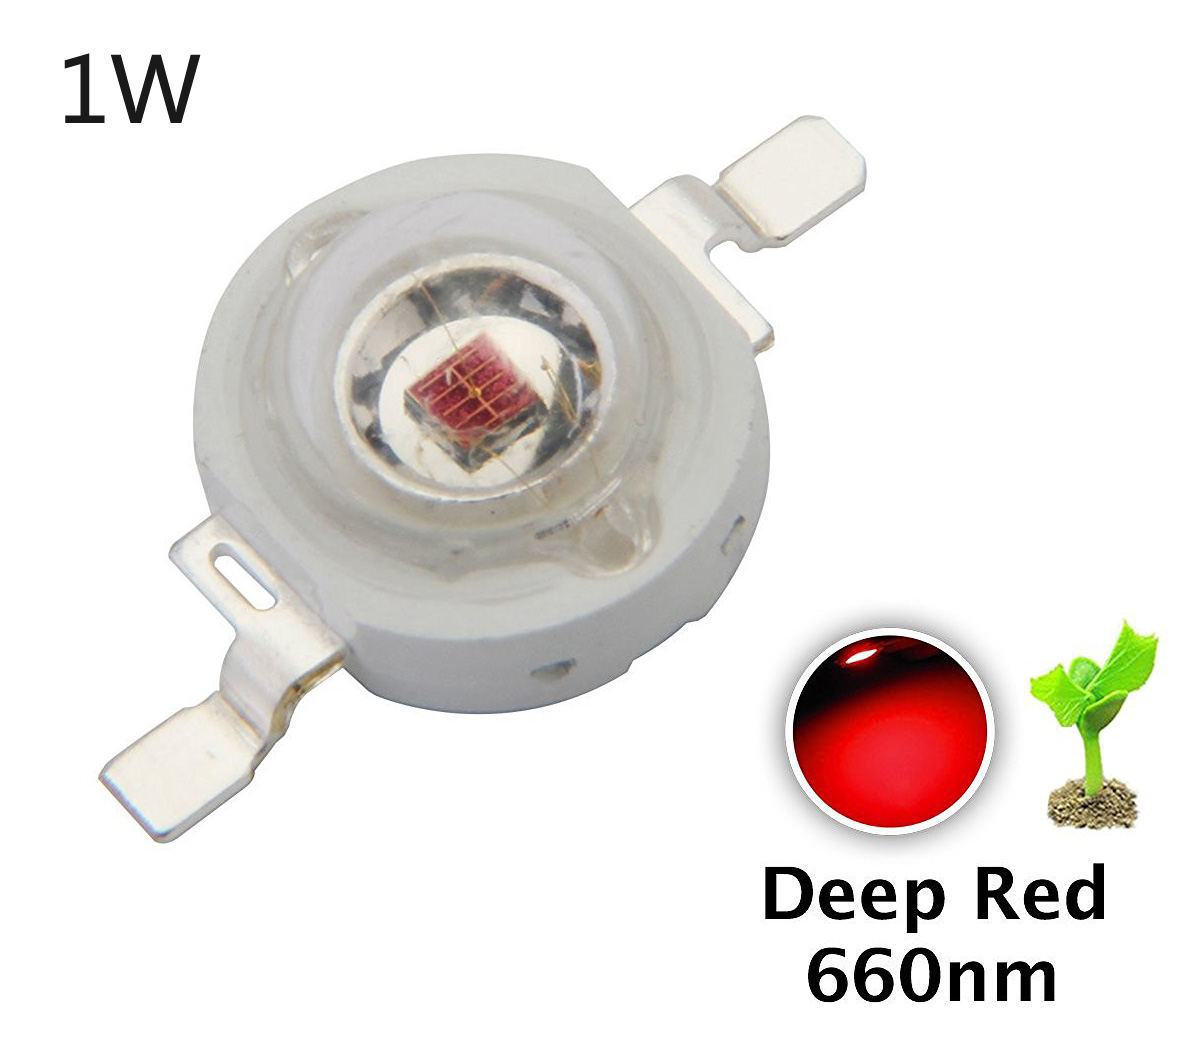 ZX-15pcs-1W-660nm-Red-Light-Plant-Growing-DIY-LED-Lamp-Chip-Garden-Greenhouse-Seedling-Lights-1094034